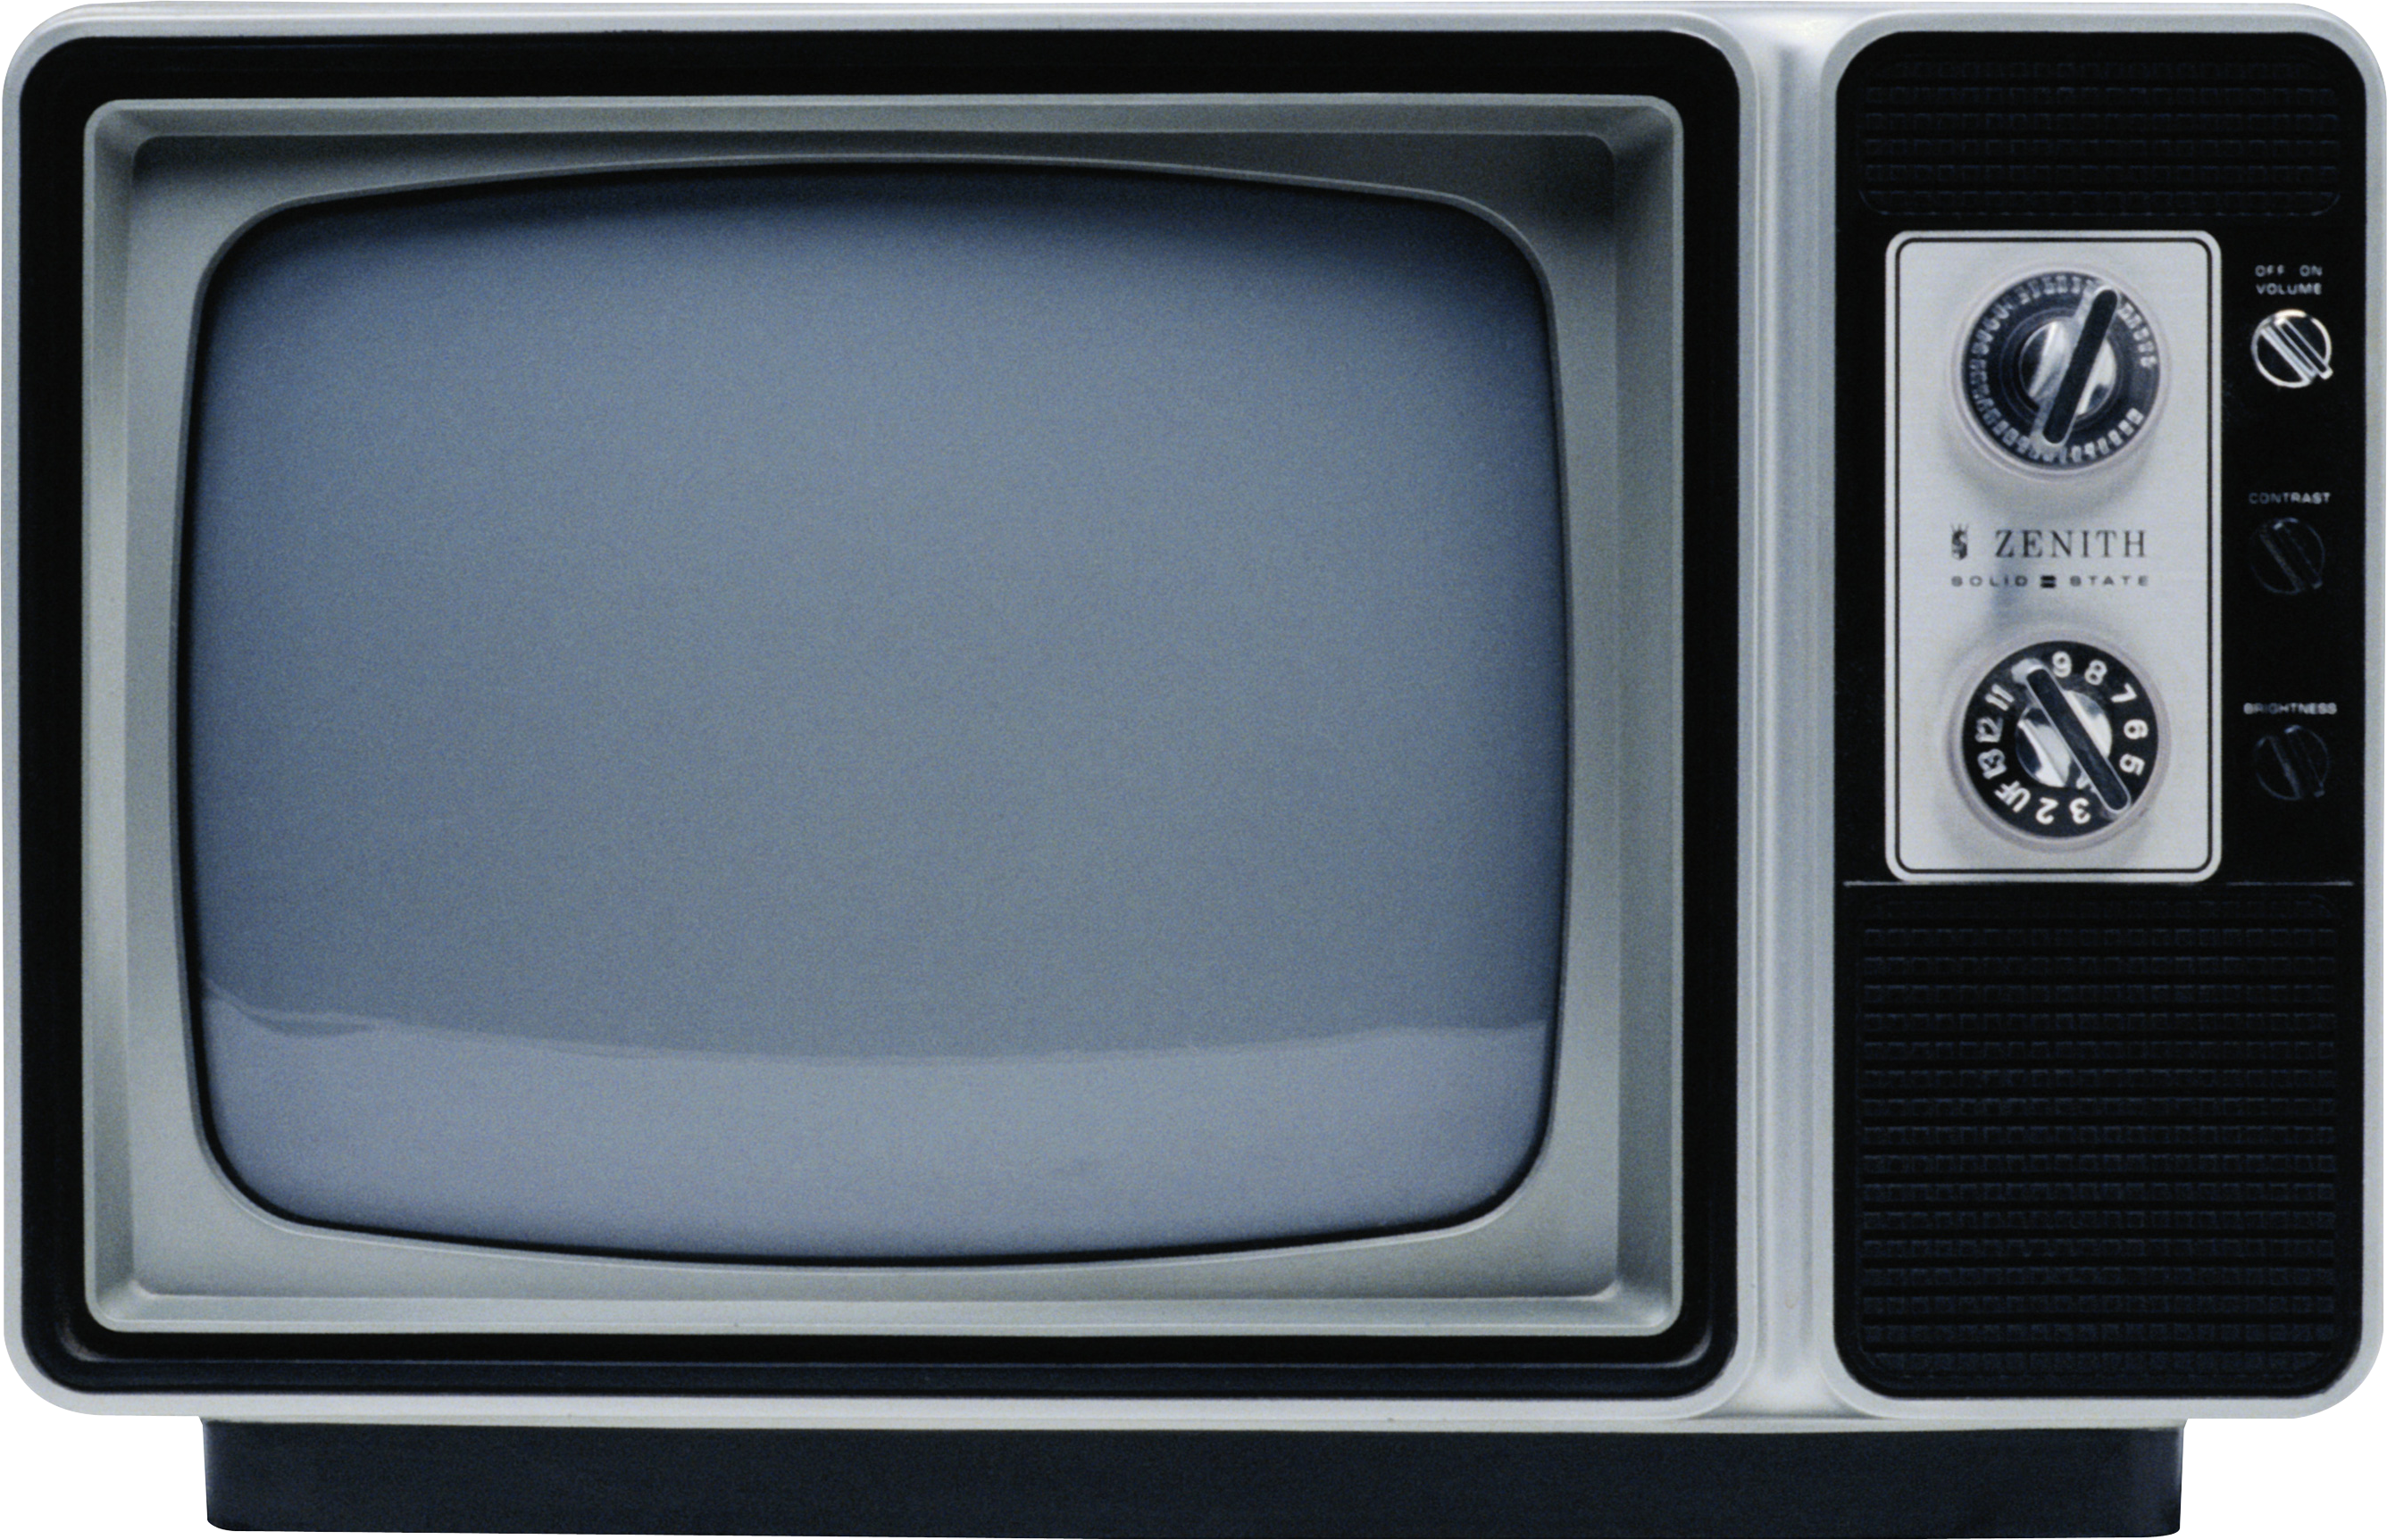 Old Television PNG Image